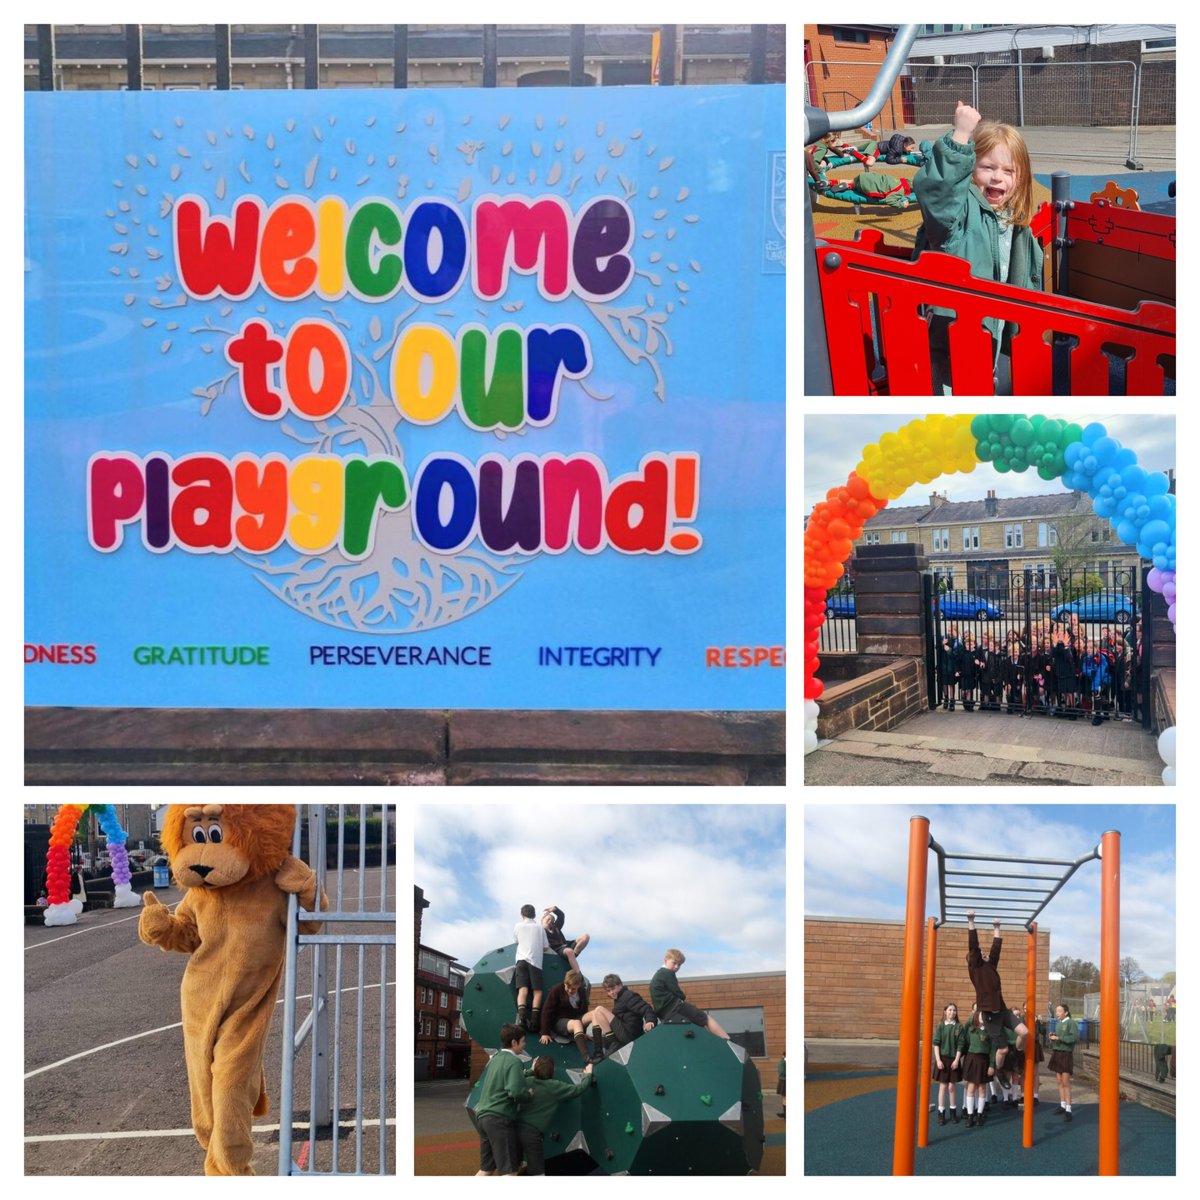 The most exciting Monday ever as our brand new playground opened yesterday! Thank you to the whole Jordanhill School community who have made this beautiful playground possible for our children.” #fundraising #schooldevelopment #alumni #idpe